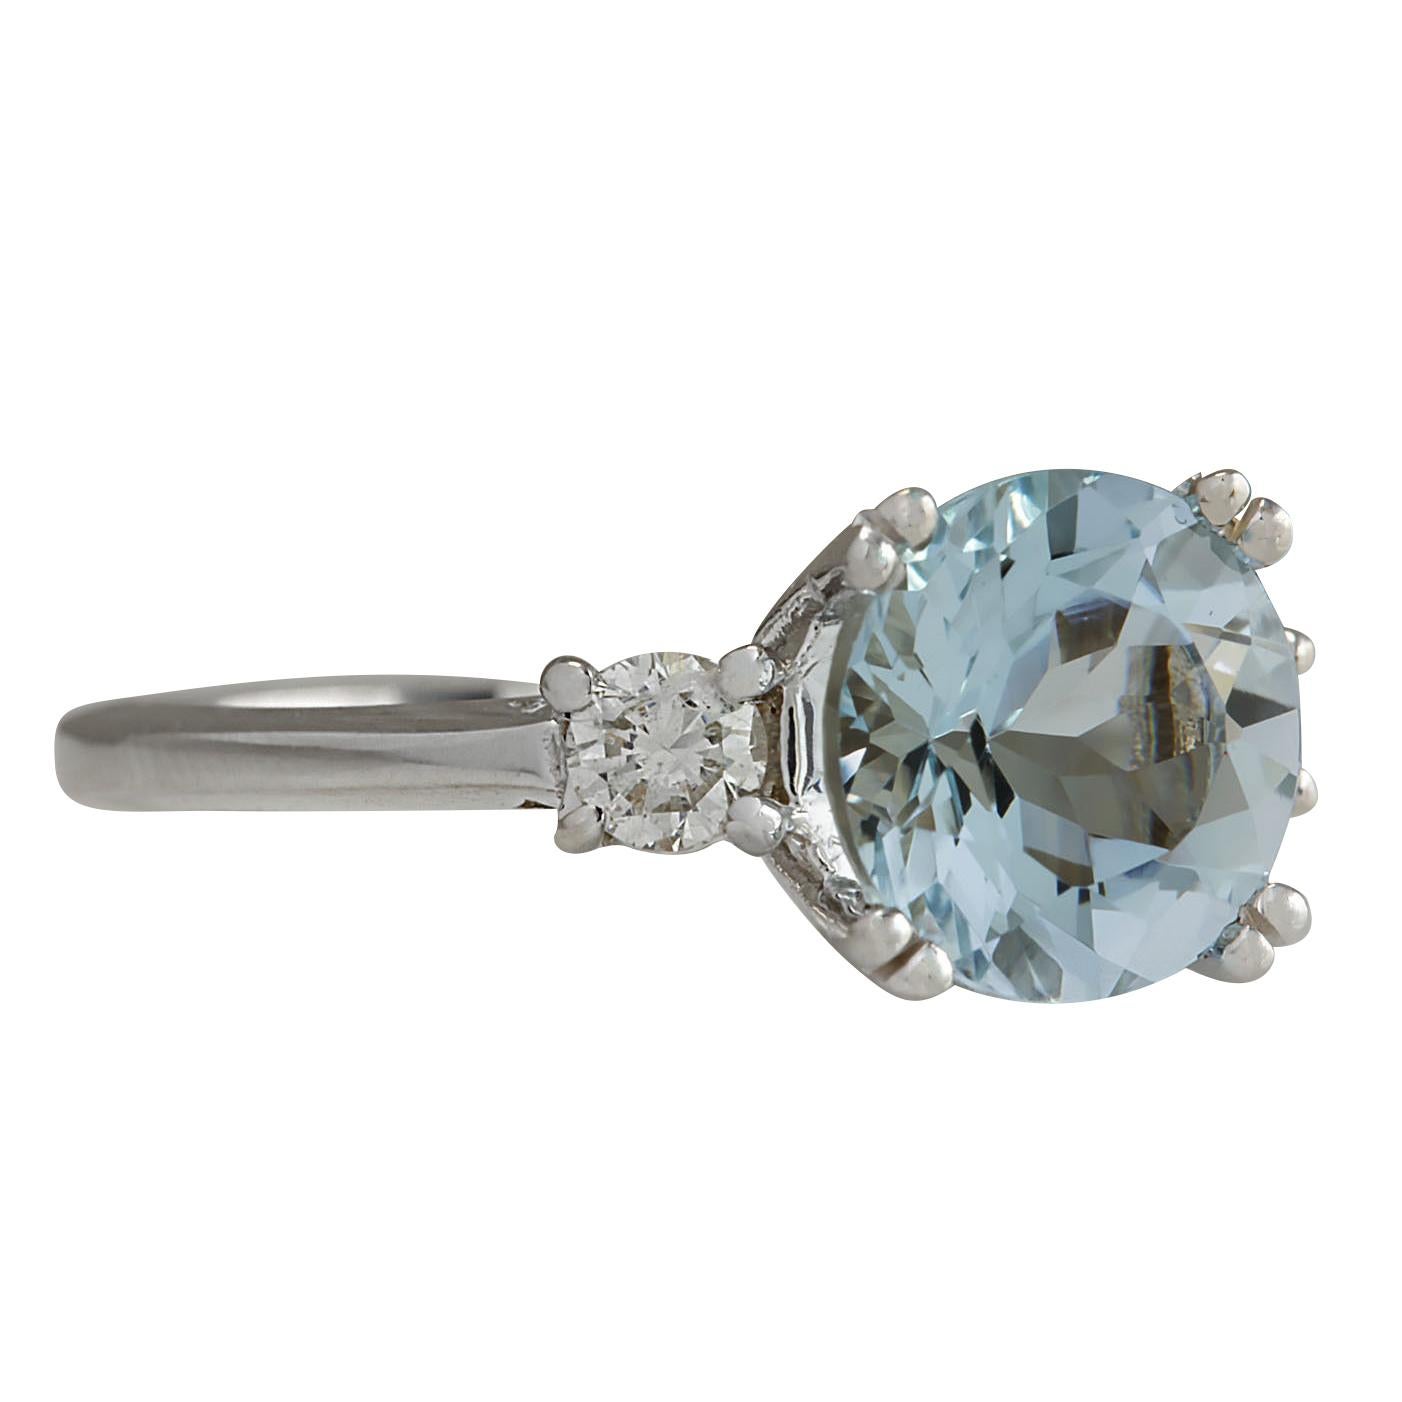 Stamped: 14K White Gold
Total Ring Weight: 4.0 Grams
Total Natural Aquamarine Weight is 2.11 Carat (Measures: 8.50x8.50 mm)
Color: Blue
Total Natural Diamond Weight is 0.22 Carat
Color: F-G, Clarity: VS2-SI1
Face Measures: 8.50x14.05 mm
Sku: